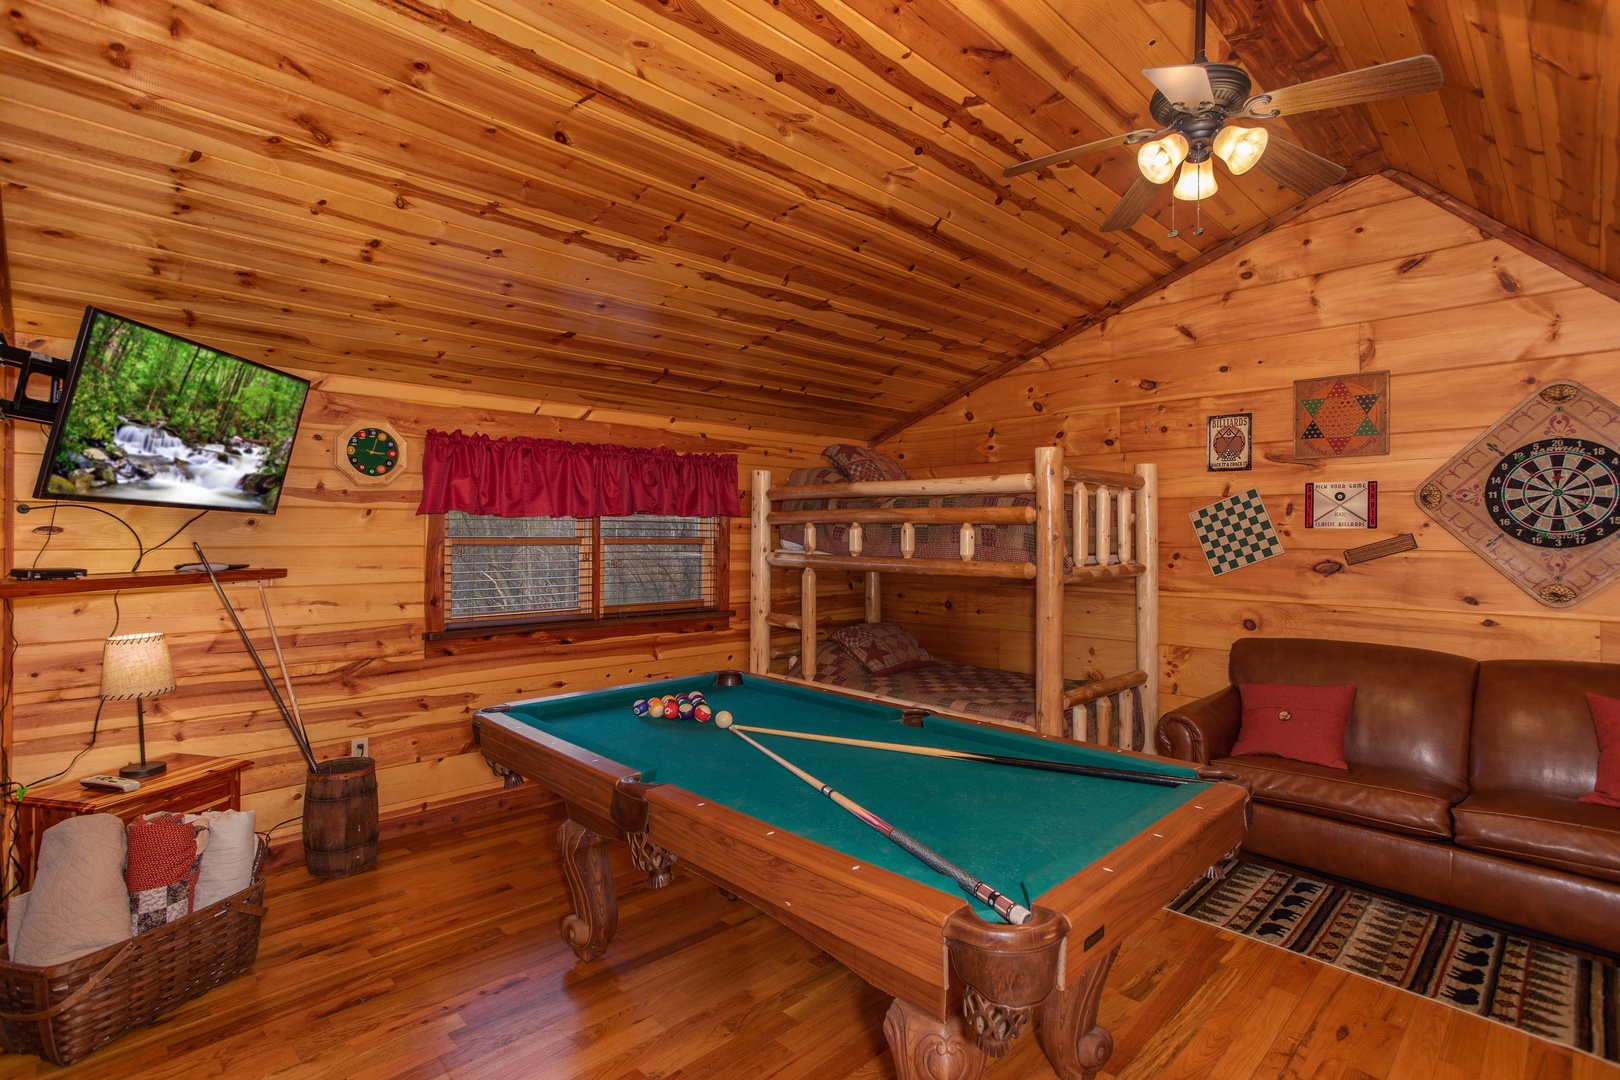 Loft with a pool table, TV, and bunk beds at Moonshiner's Ridge, a 1-bedroom cabin rental located in Pigeon Forge